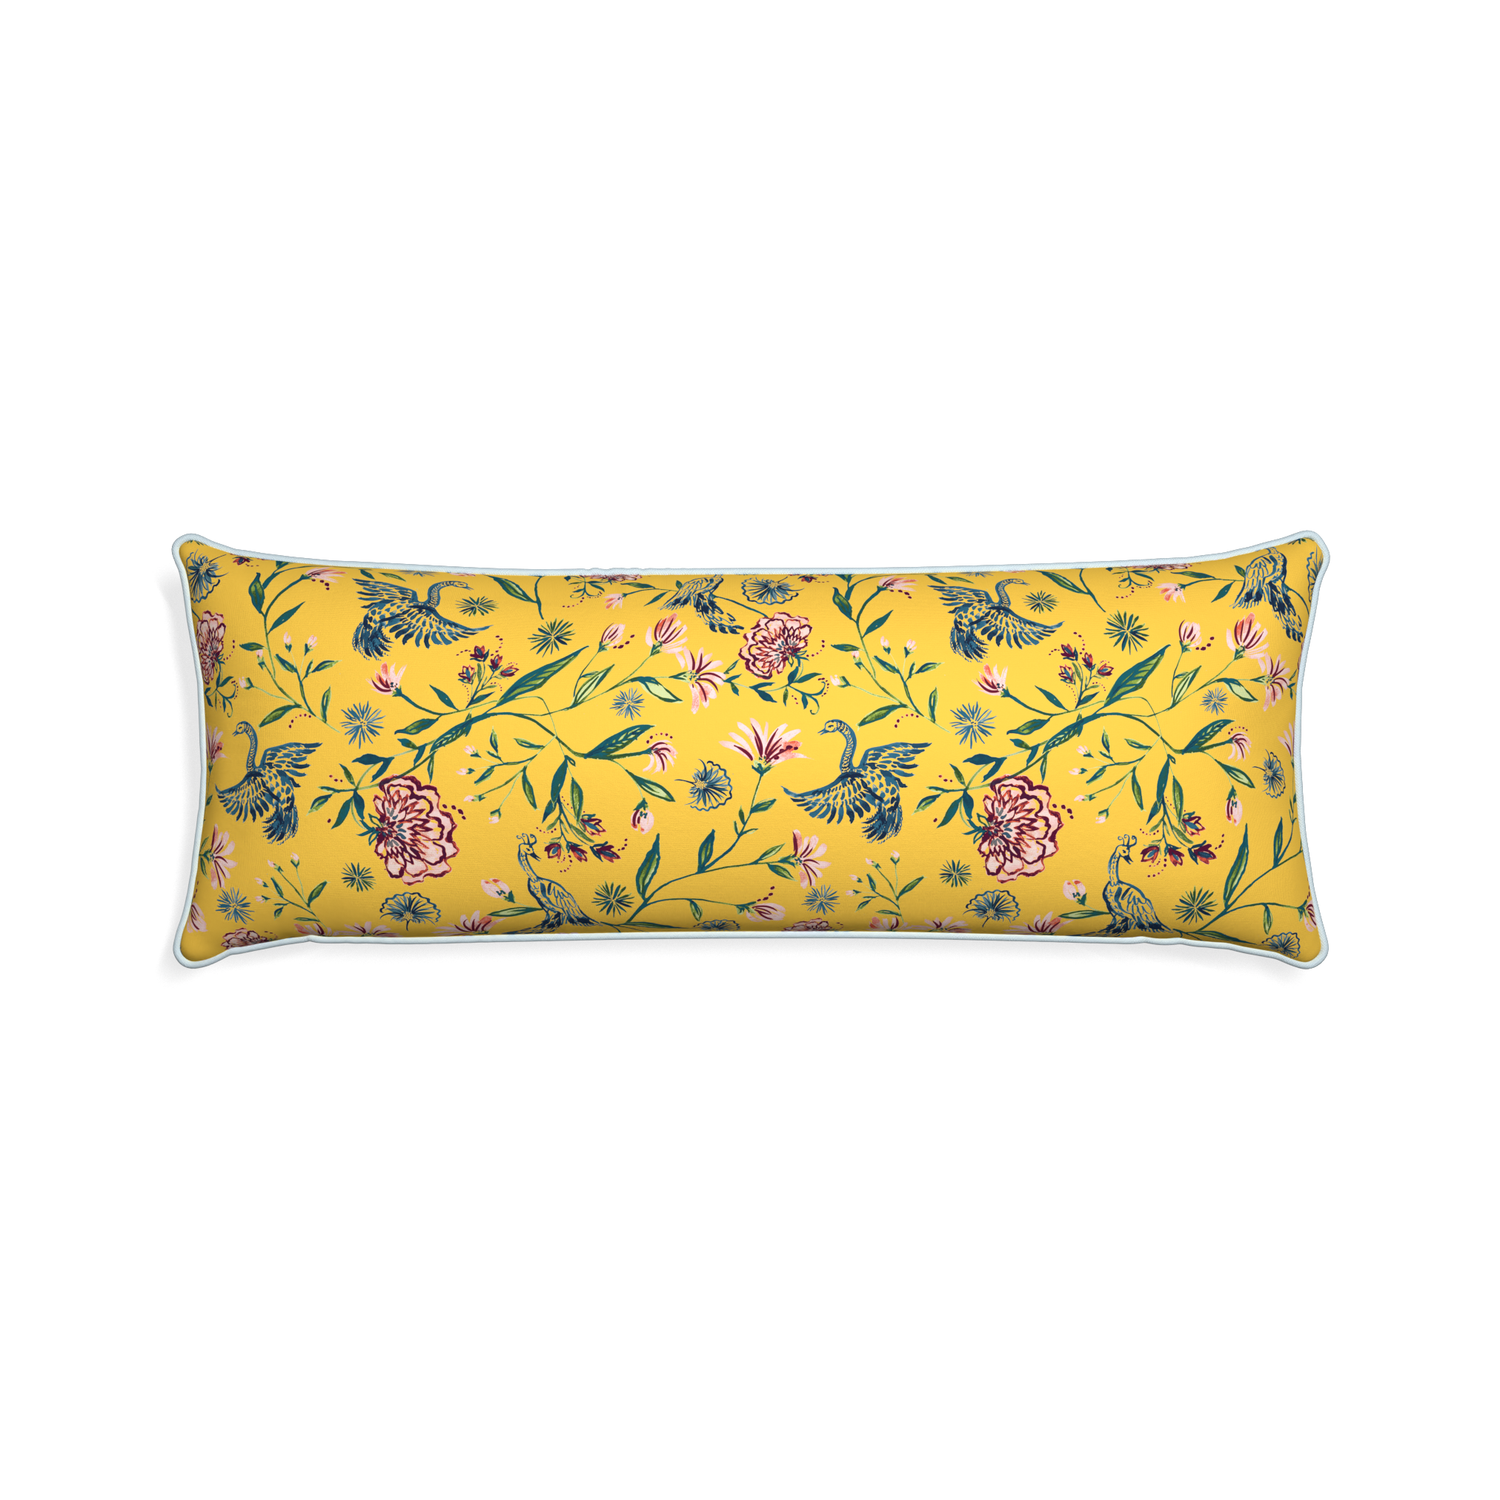 Xl-lumbar daphne canary custom pillow with powder piping on white background